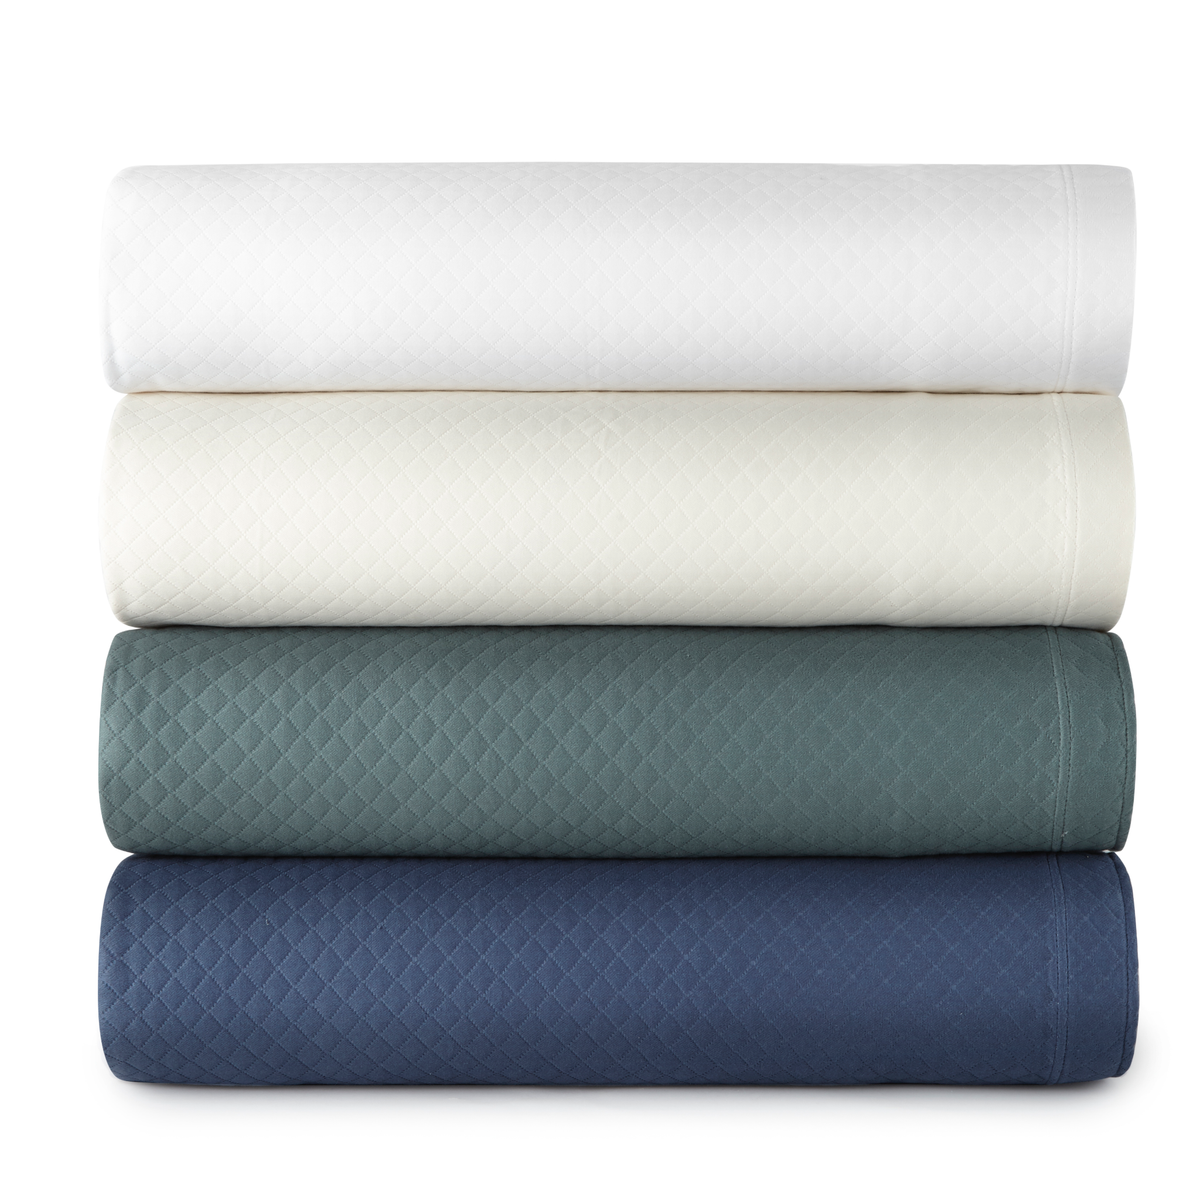 Folded Coverlets in Different Colors of Peacock Alley Oxford Matelassé Bedding